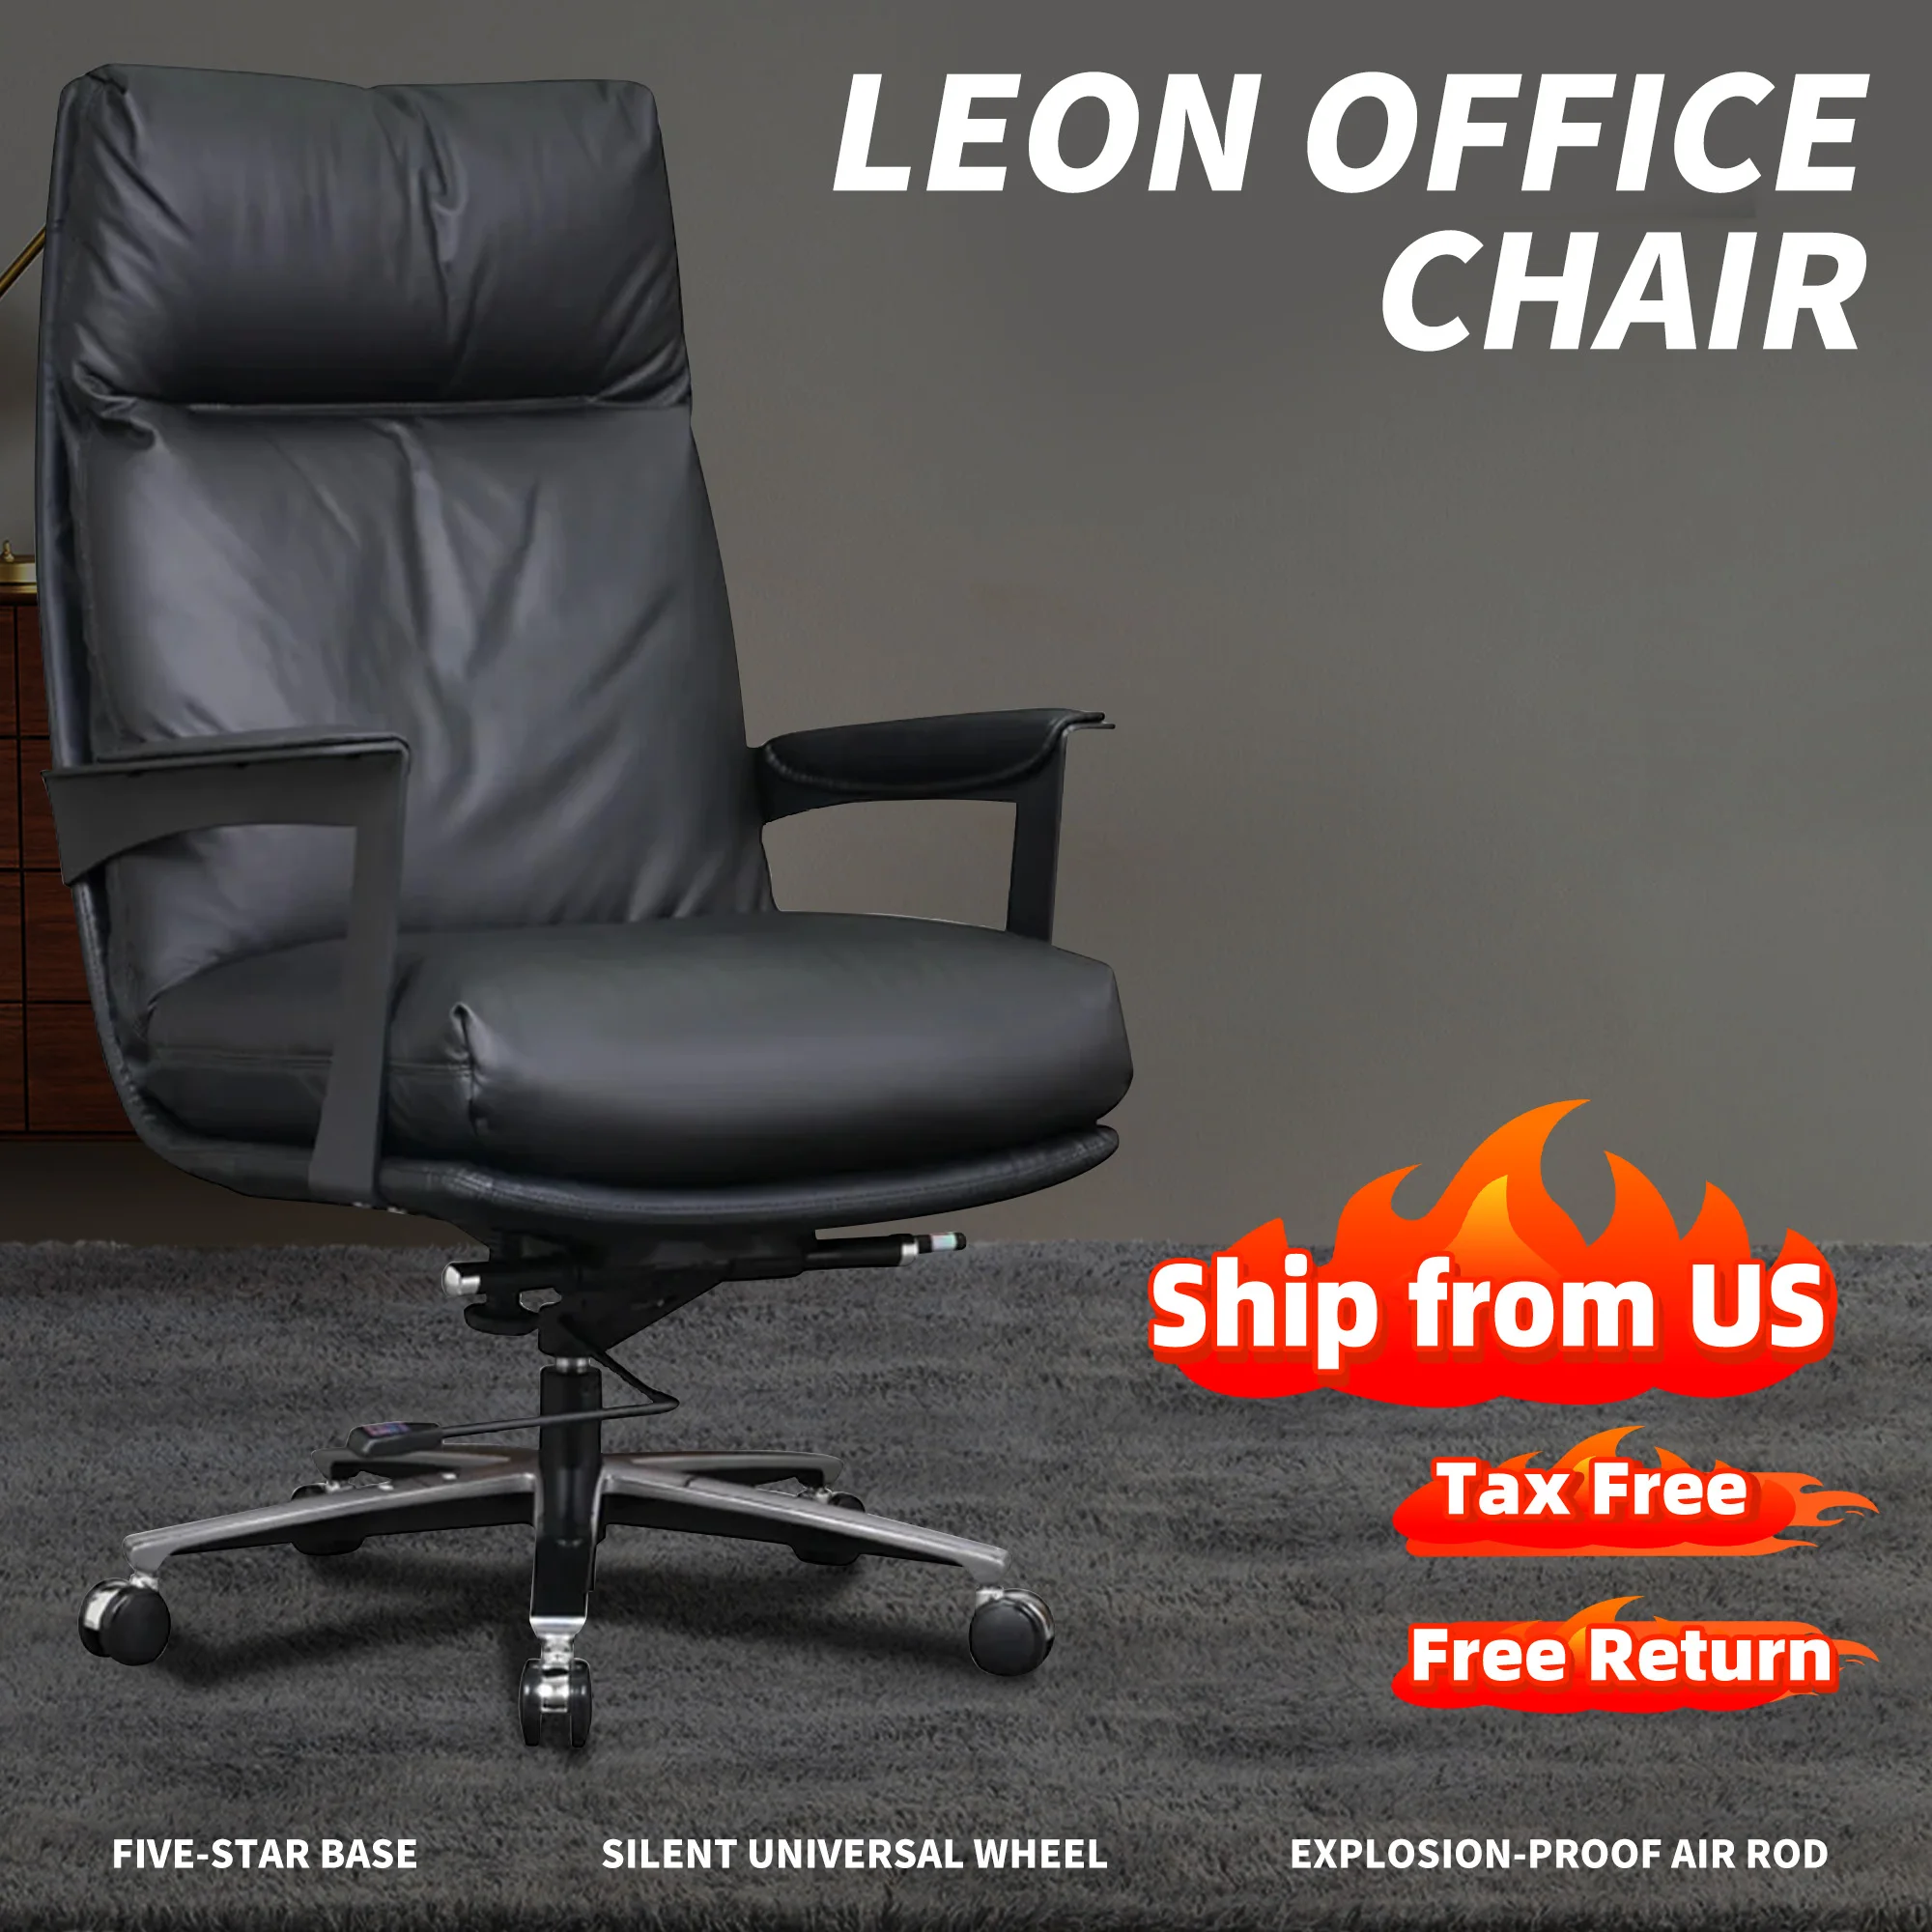 Kinnls Leon Upholstered Gaming Chair Genuine Leather Office Chair Minimalist Home Desk 360°Swivel Executive Chair for Boss